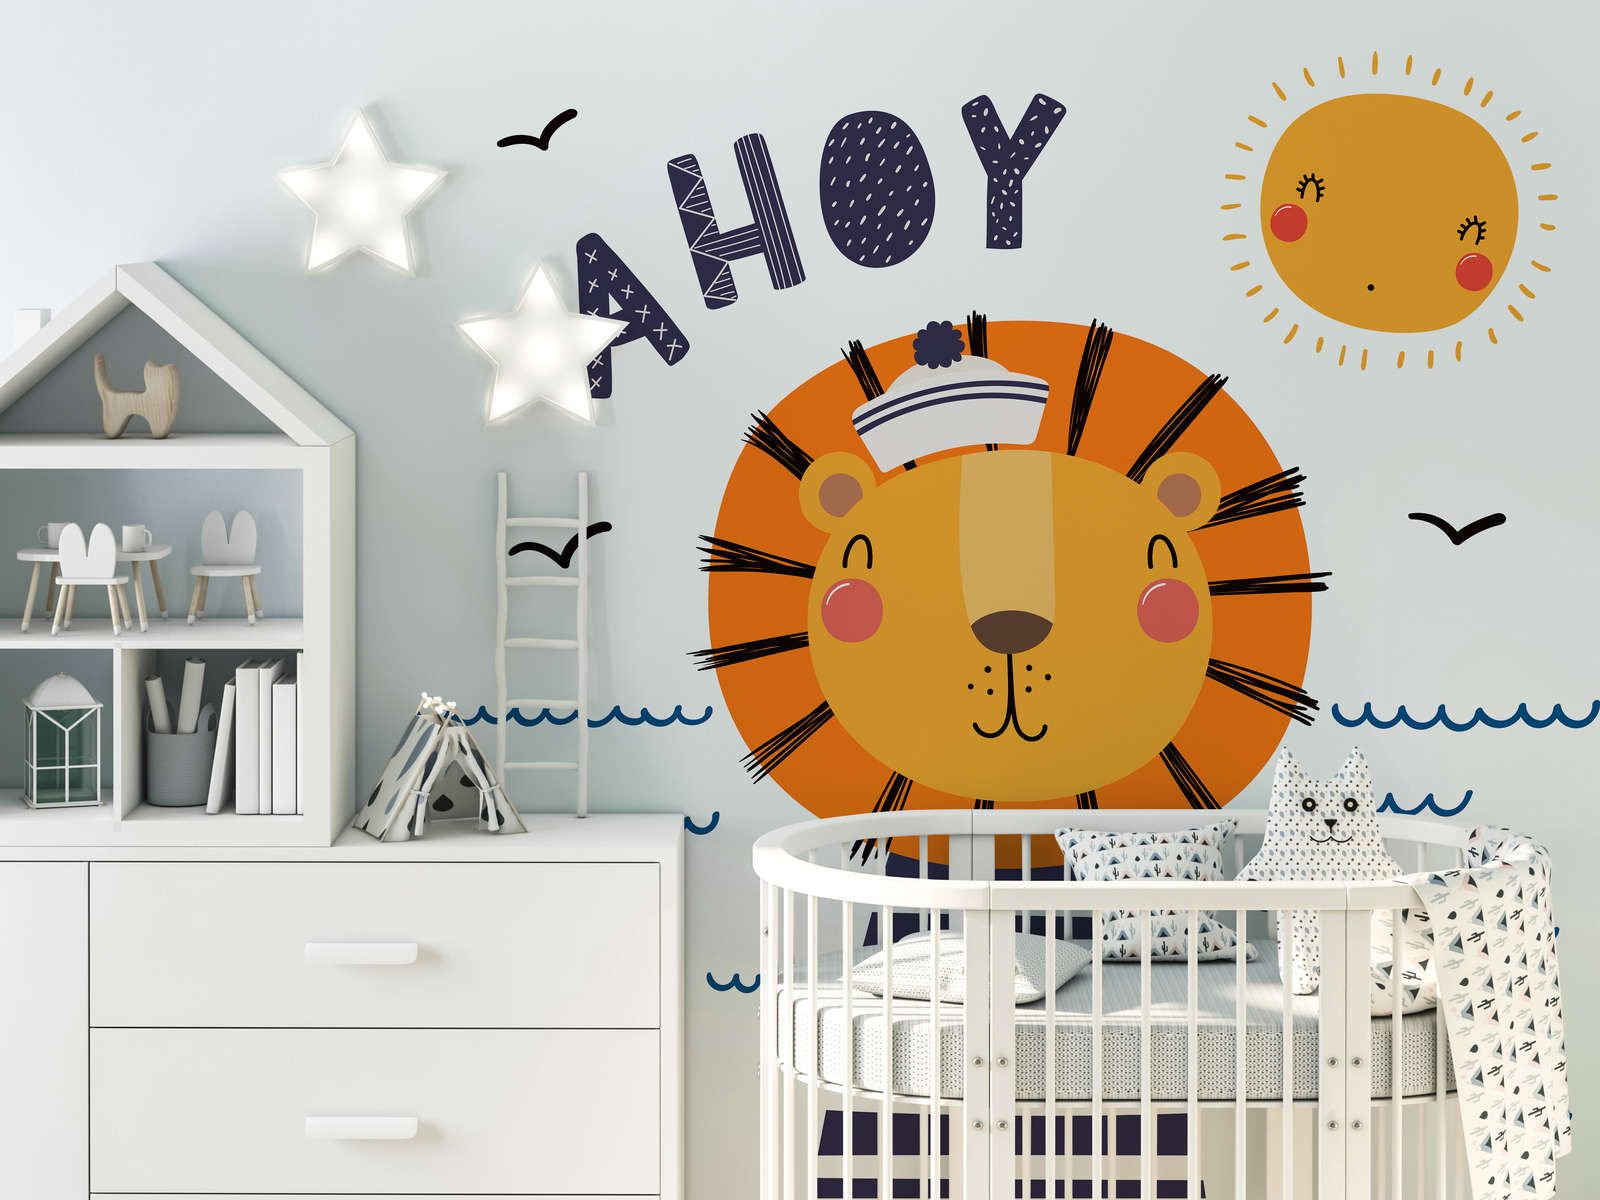             Photo wallpaper for children's room with lion pirate - Smooth & slightly shiny non-woven
        